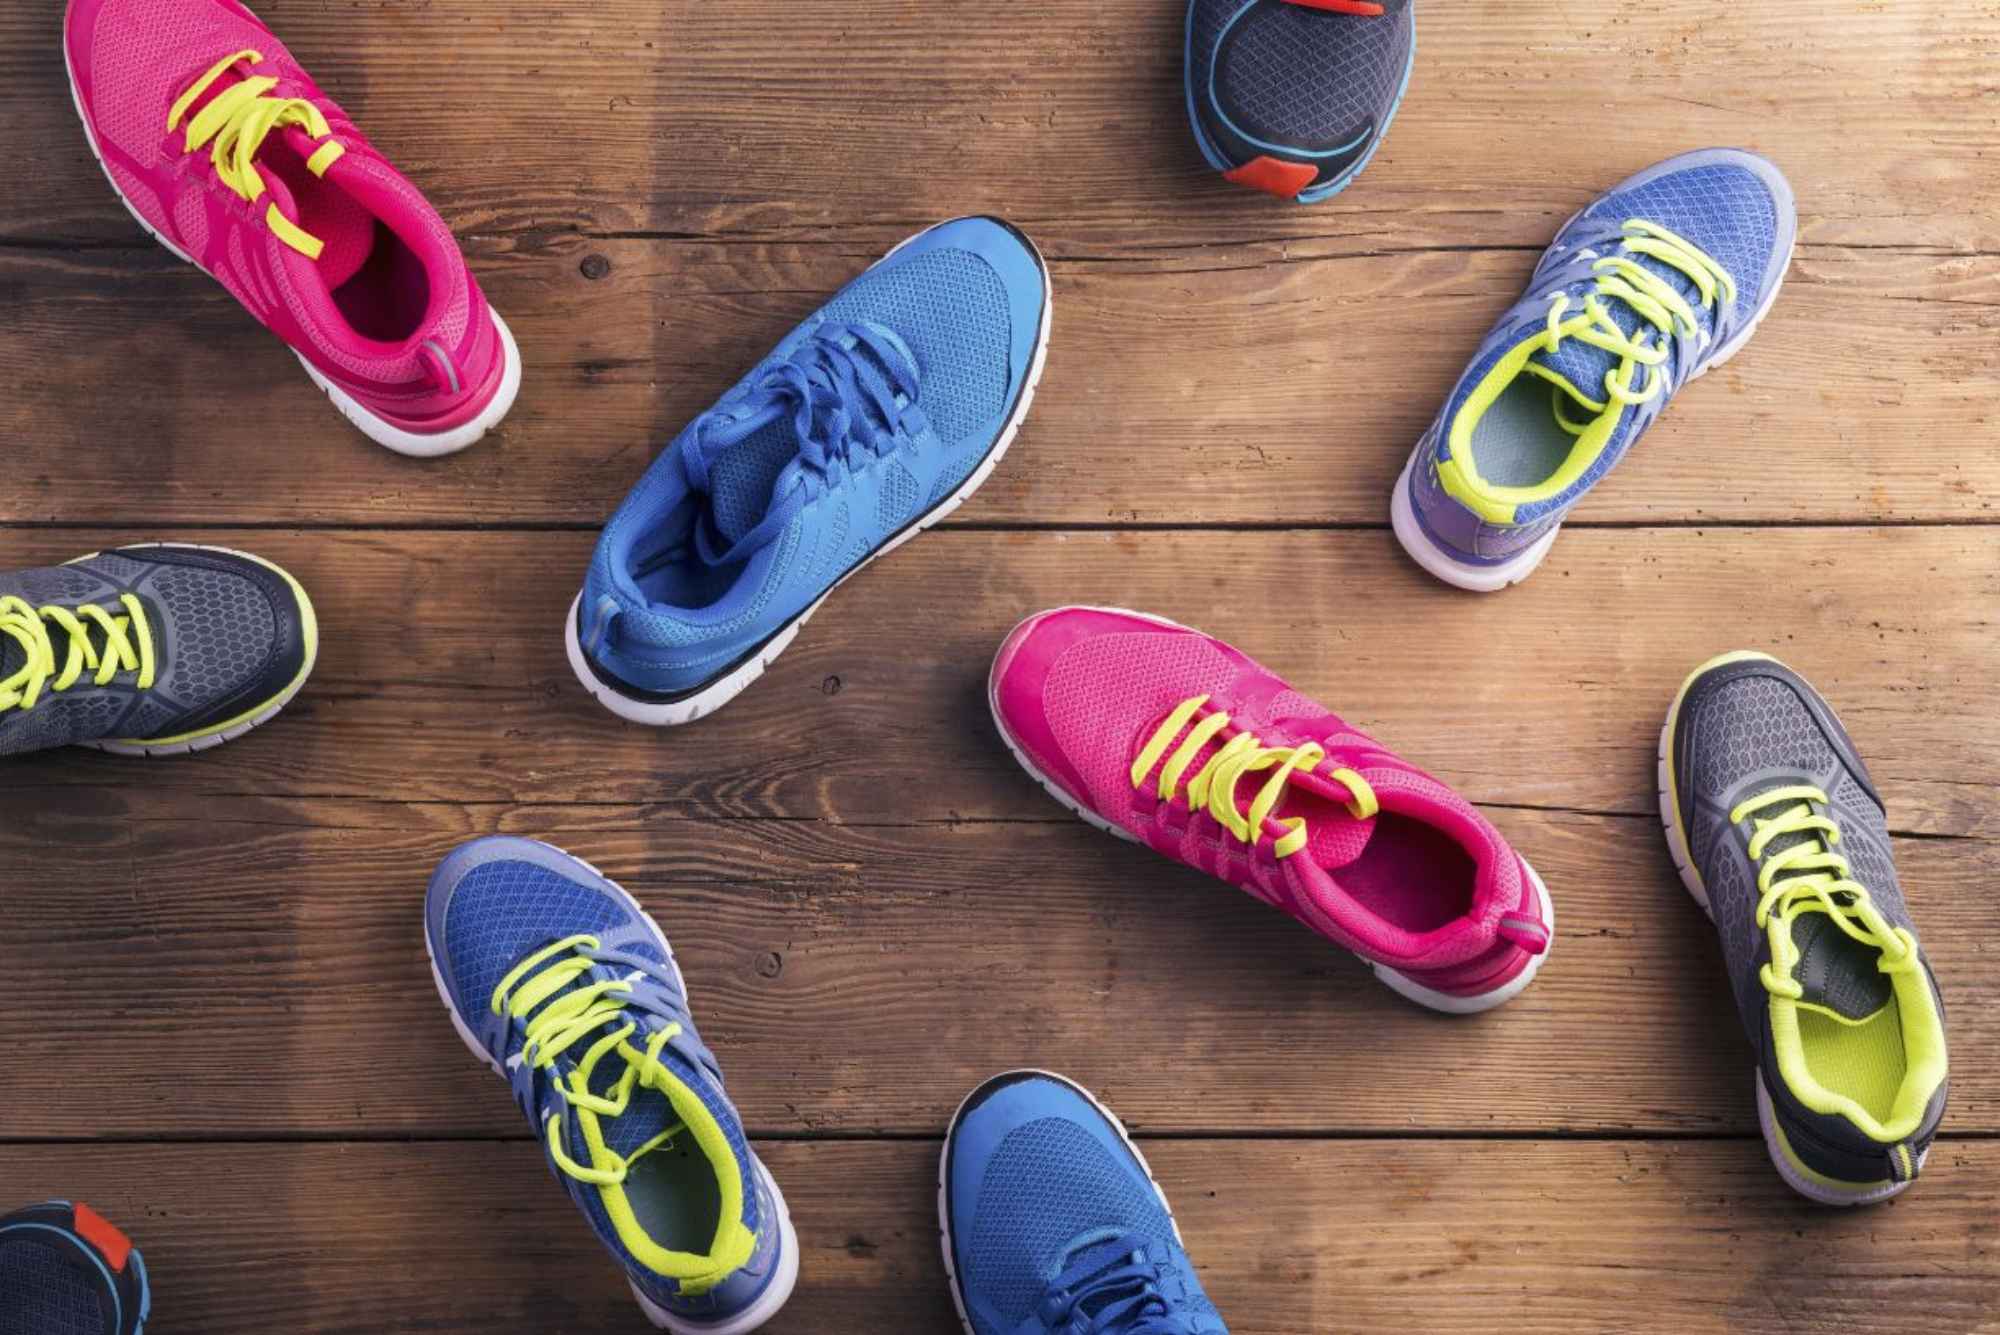 Are Sports Shoes the Same for Men and Women